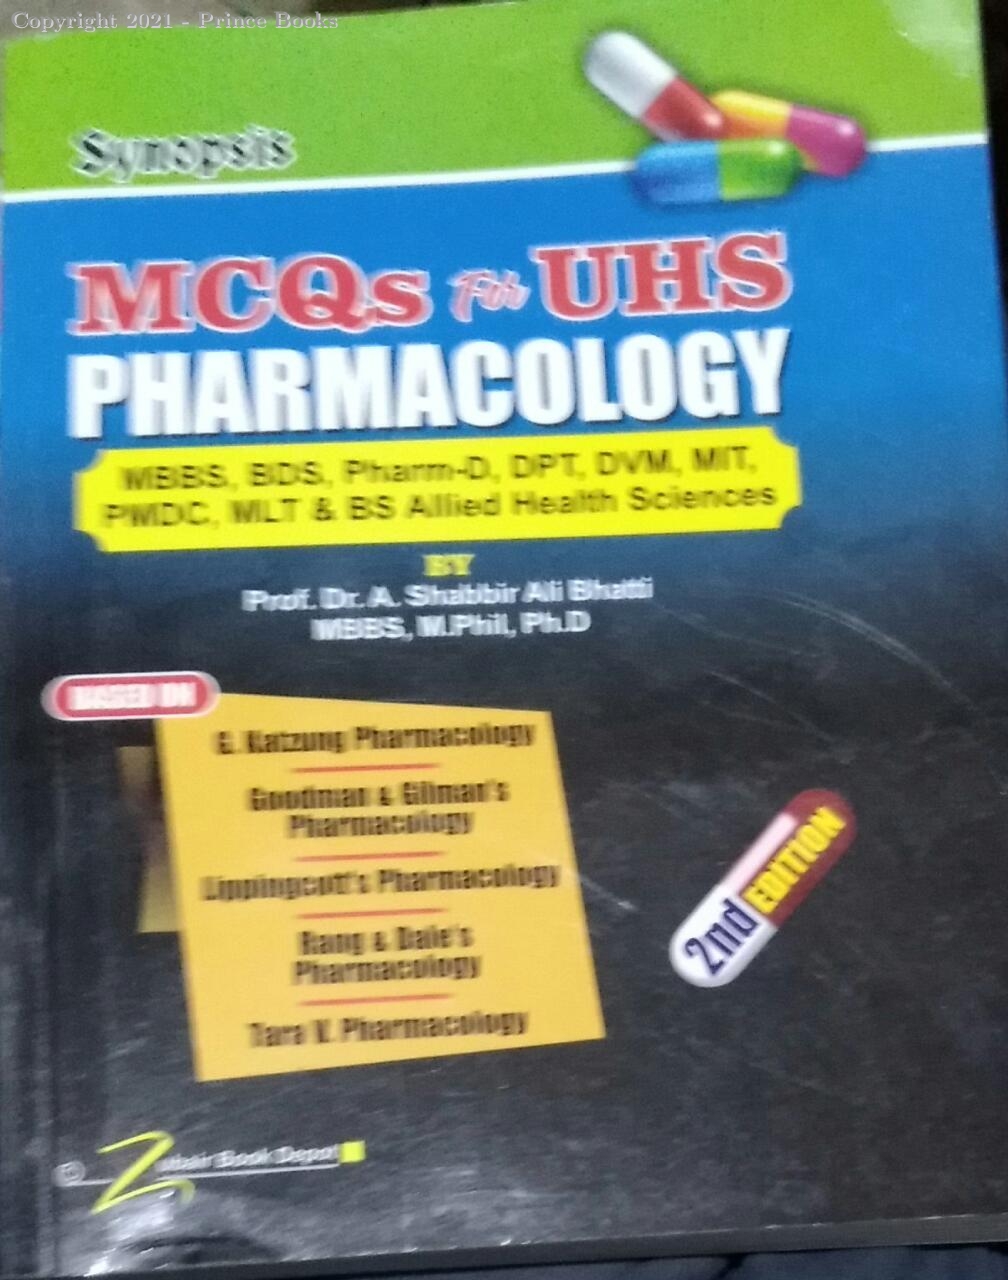 synopsis mcqs for uhs pharmacology, 2e